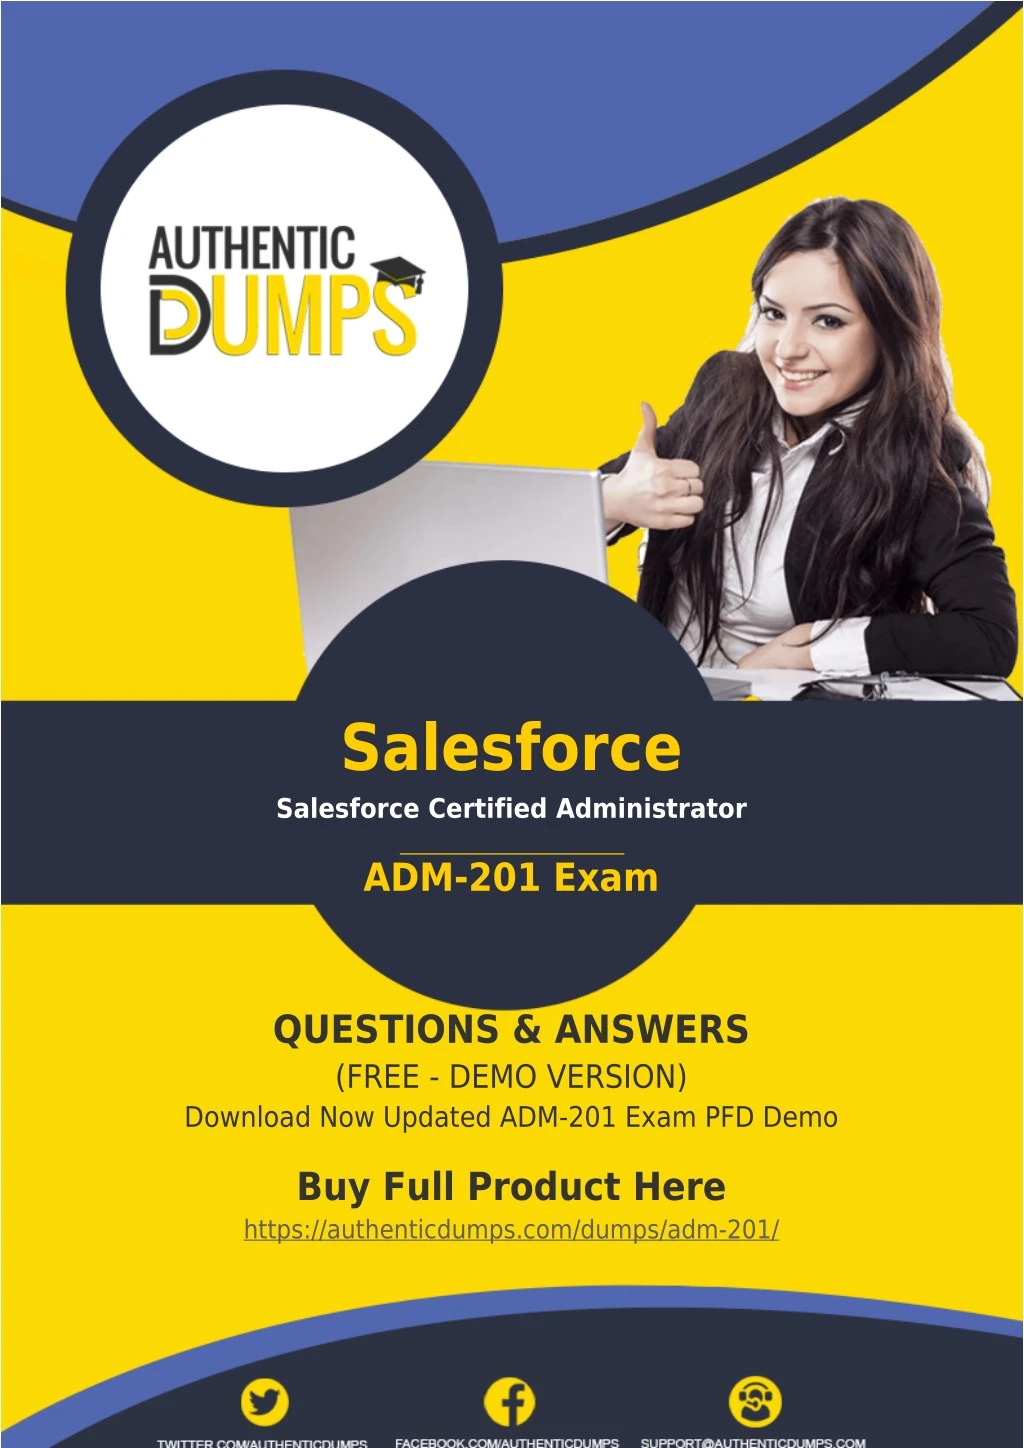 PPT - ADM-201 Dumps - Get Actual Salesforce ADM-201 Exam Questions with Sns-Brigh10